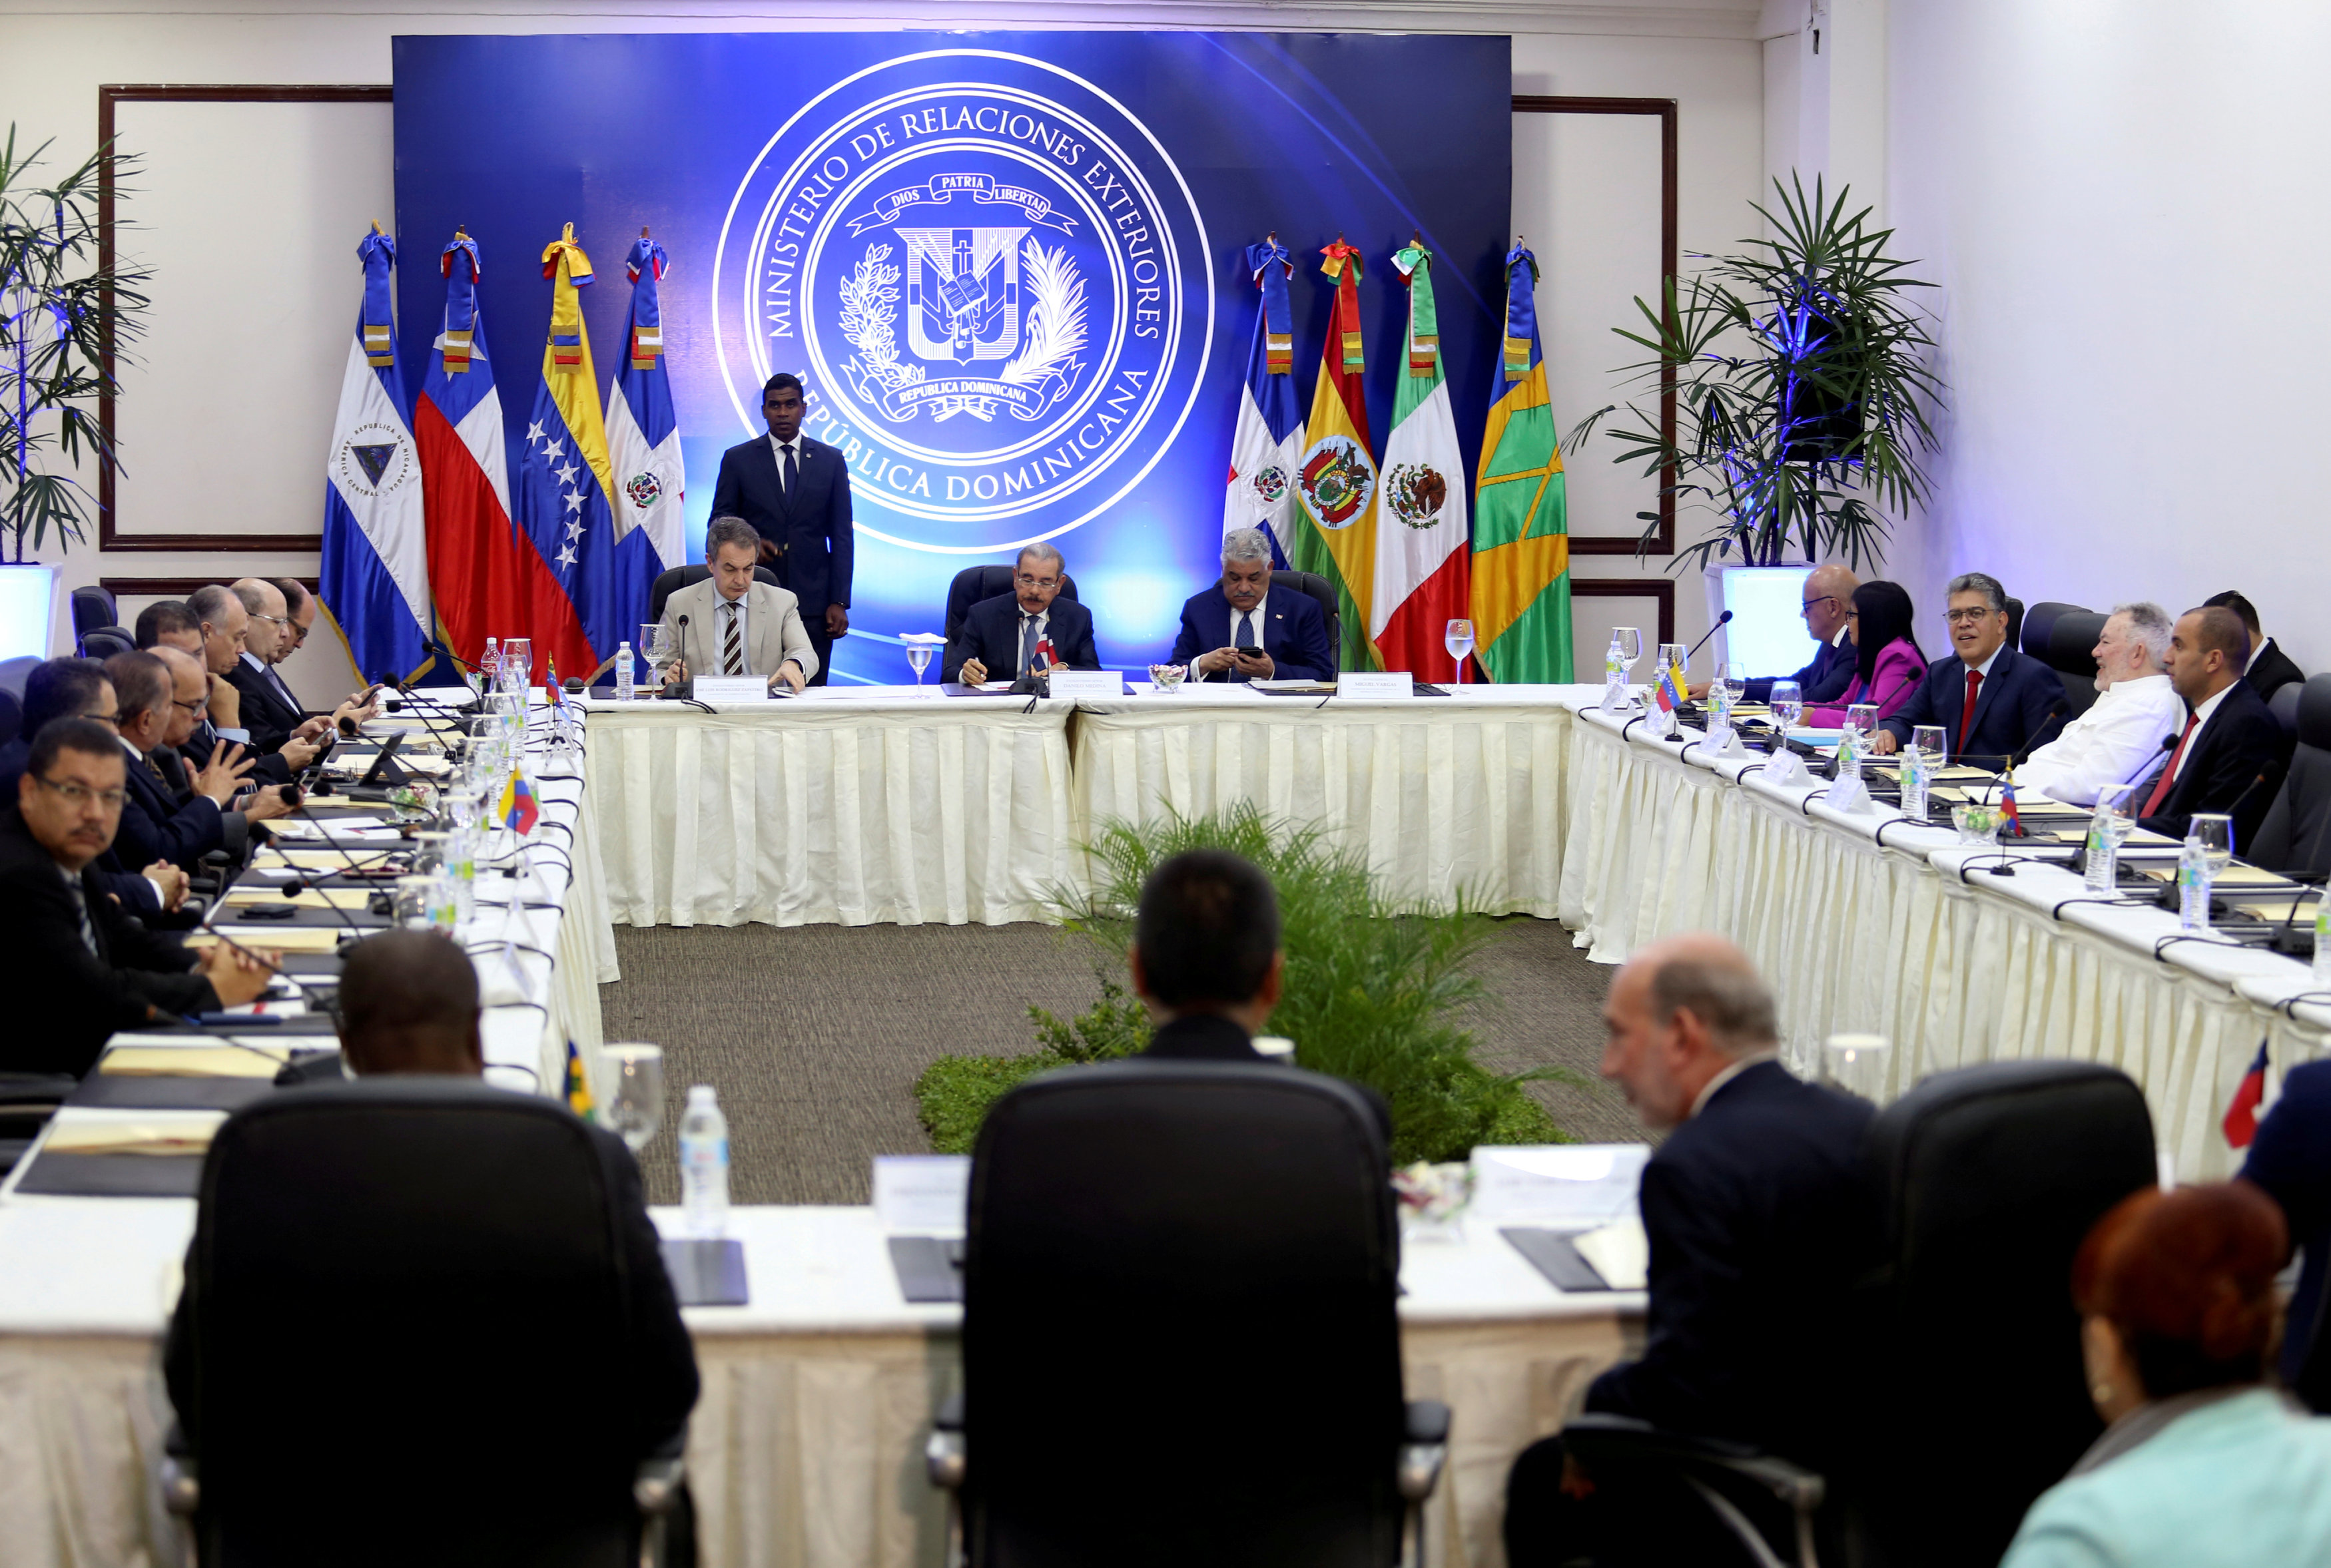 Delegates of President Nicolas Maduro's government and Venezuela's opposition coalition meet for a round of talks in Santo Domingo, Dominican Republic January 12, 2018.